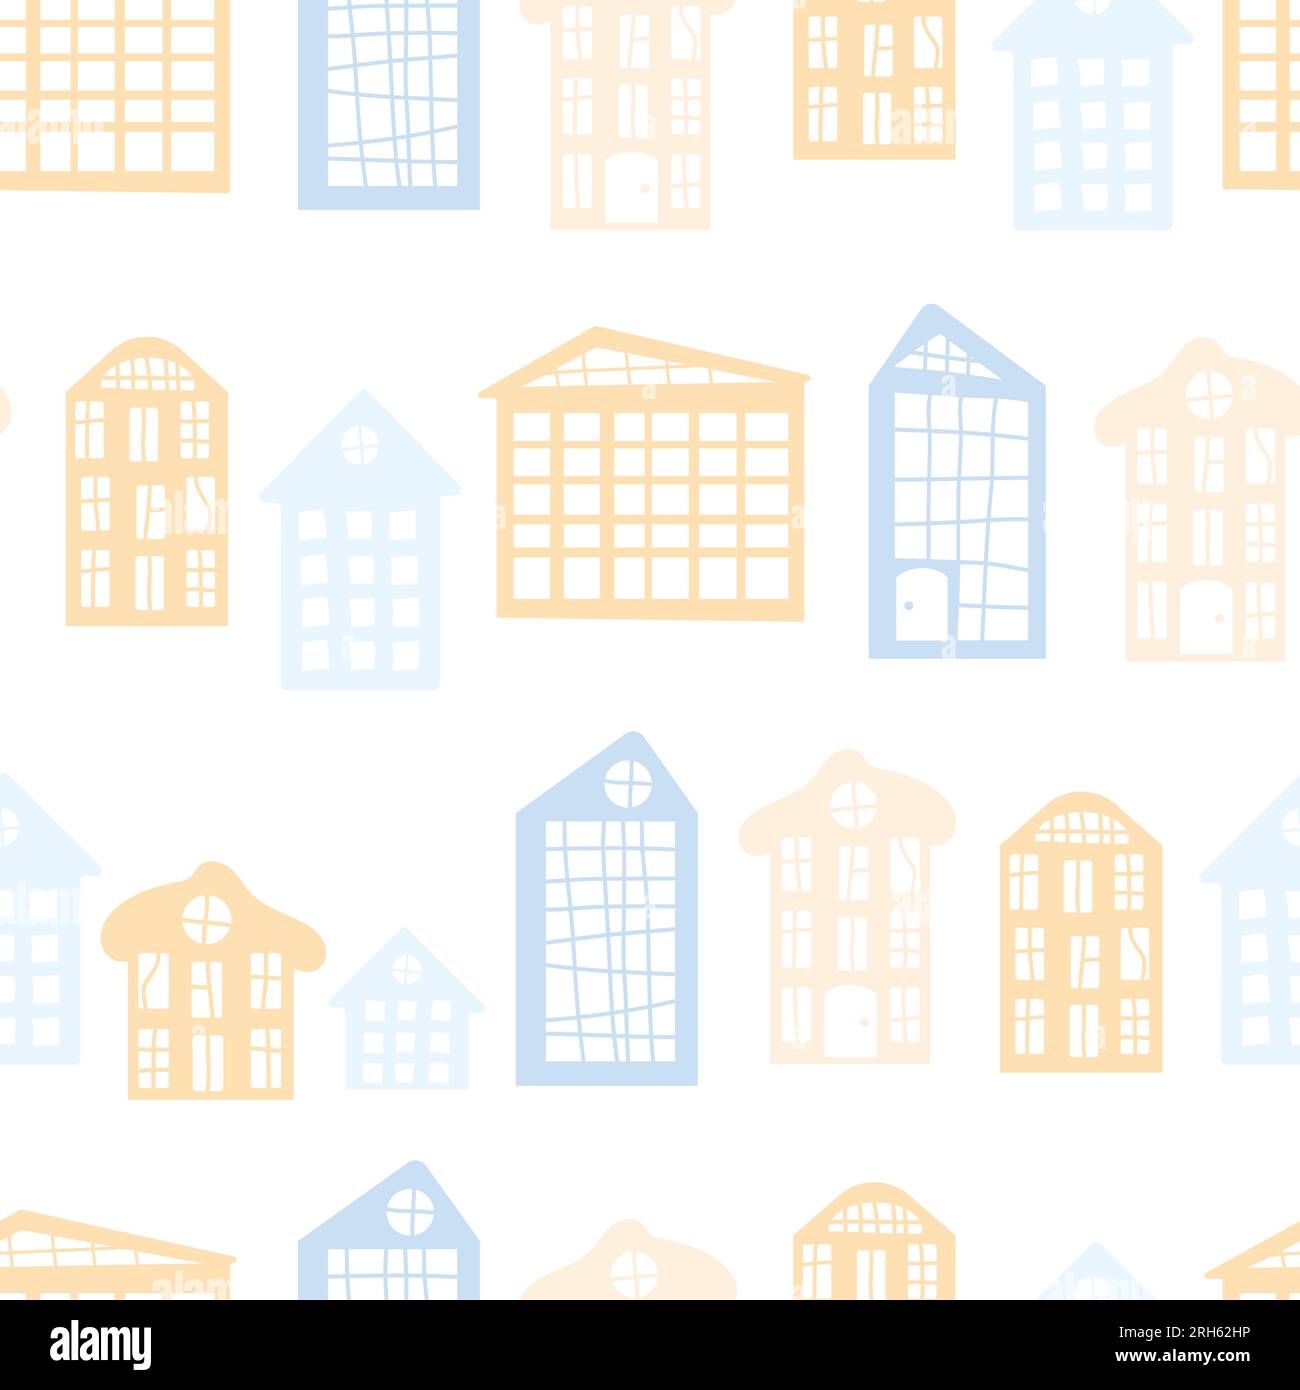 Lovely Scandinavian style childrens houses in soft pastel colors. Vector illustration, seamless pattern for nursery, wallpaper, printing on fabric, wr Stock Vector